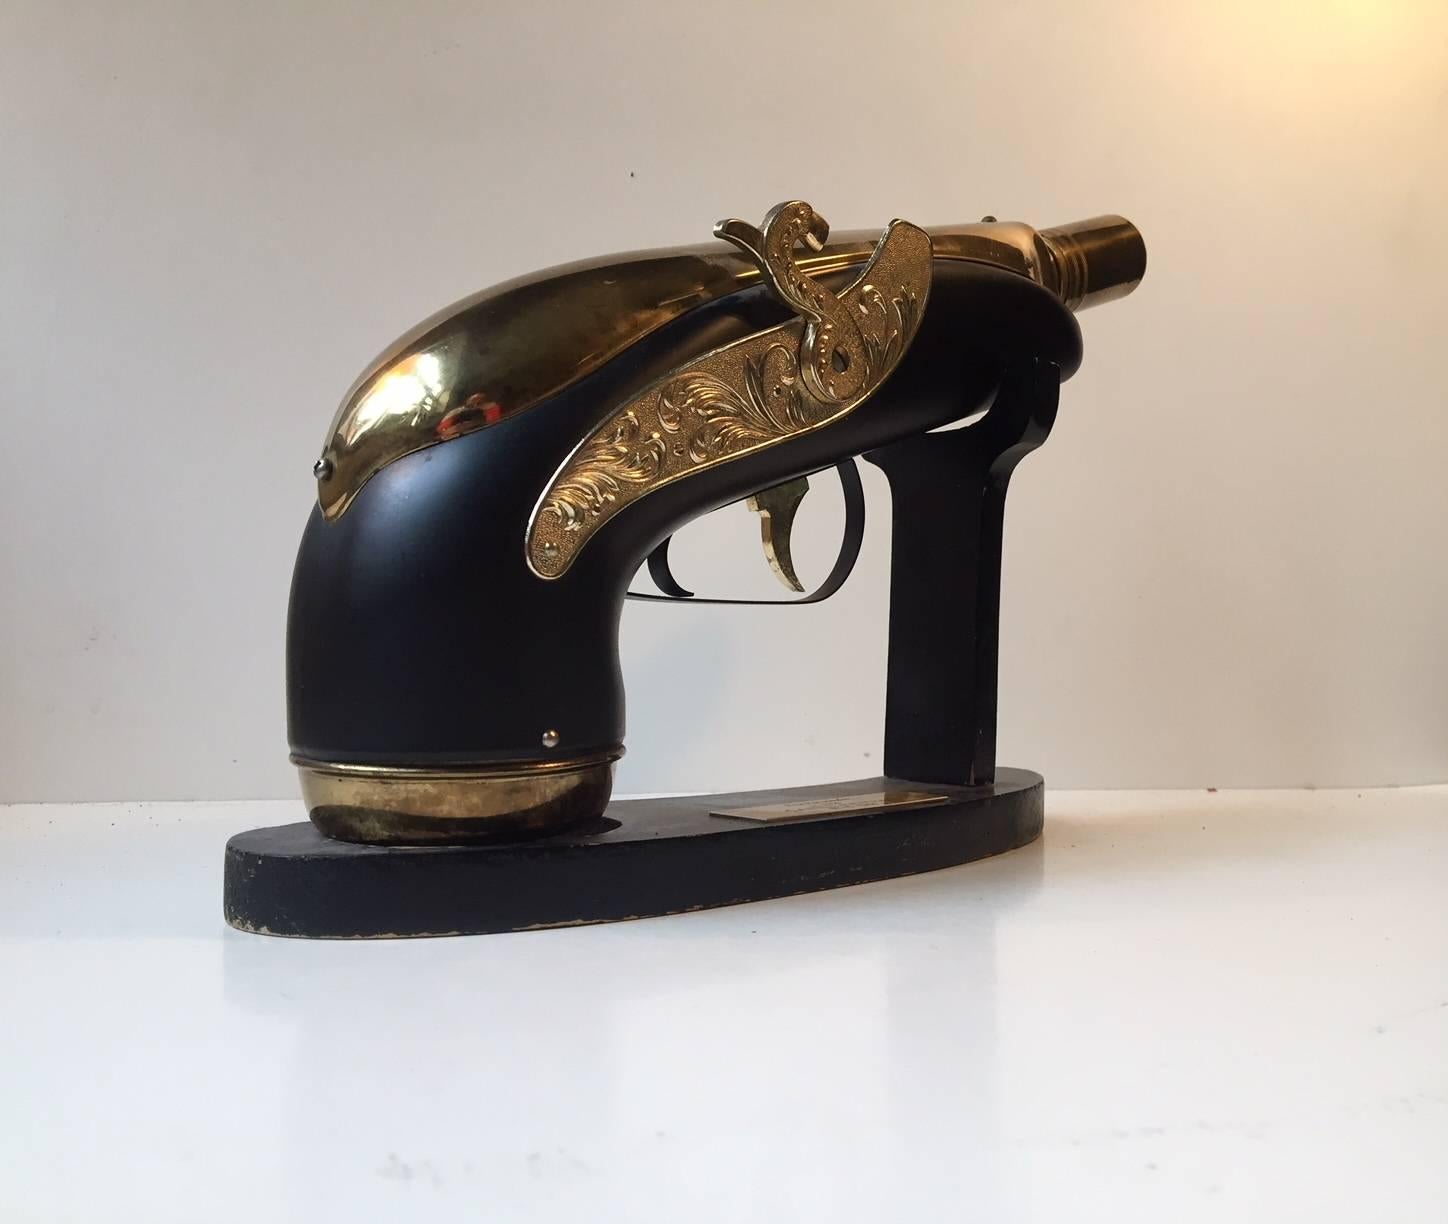 This novelty piece was given as a gift in 1964 to the manager of a Danish company called Carl Leervad by the employees. It’s a vintage blunderbuss musical gun decanter. When you take the gun decanter off its stand, it plays 